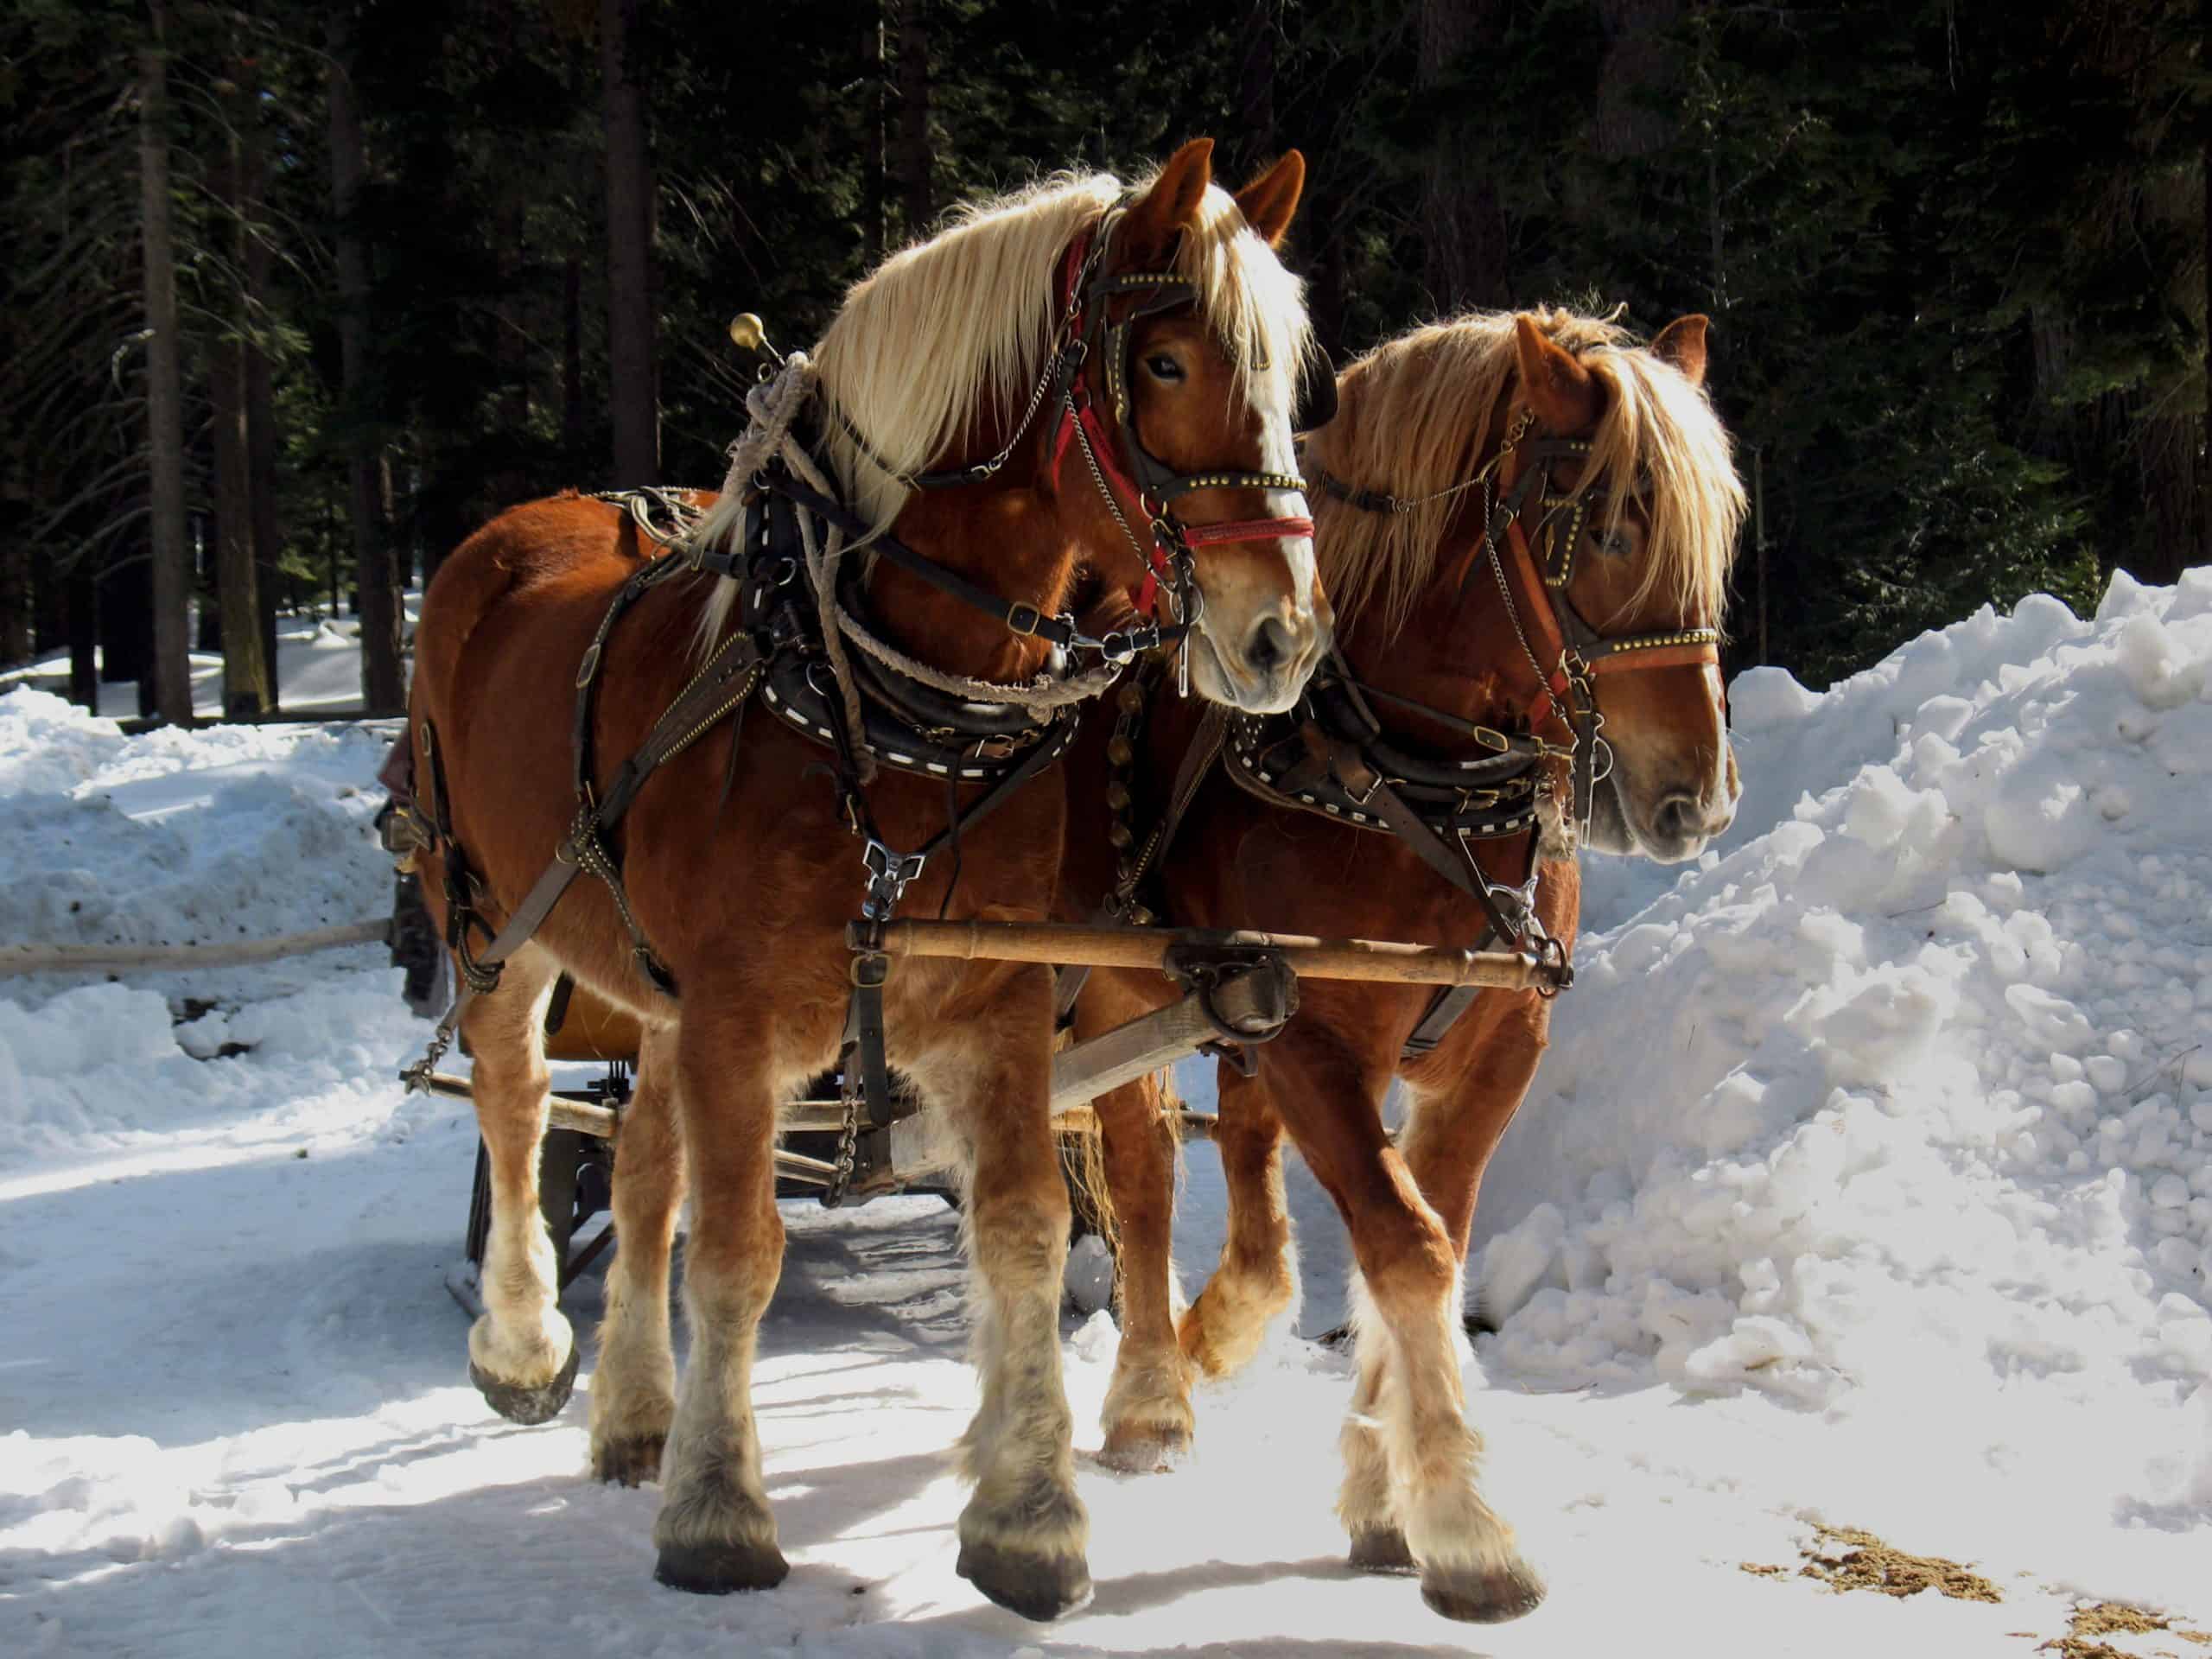 Two Belgian Draft Horses pulling a sleigh in the snow.